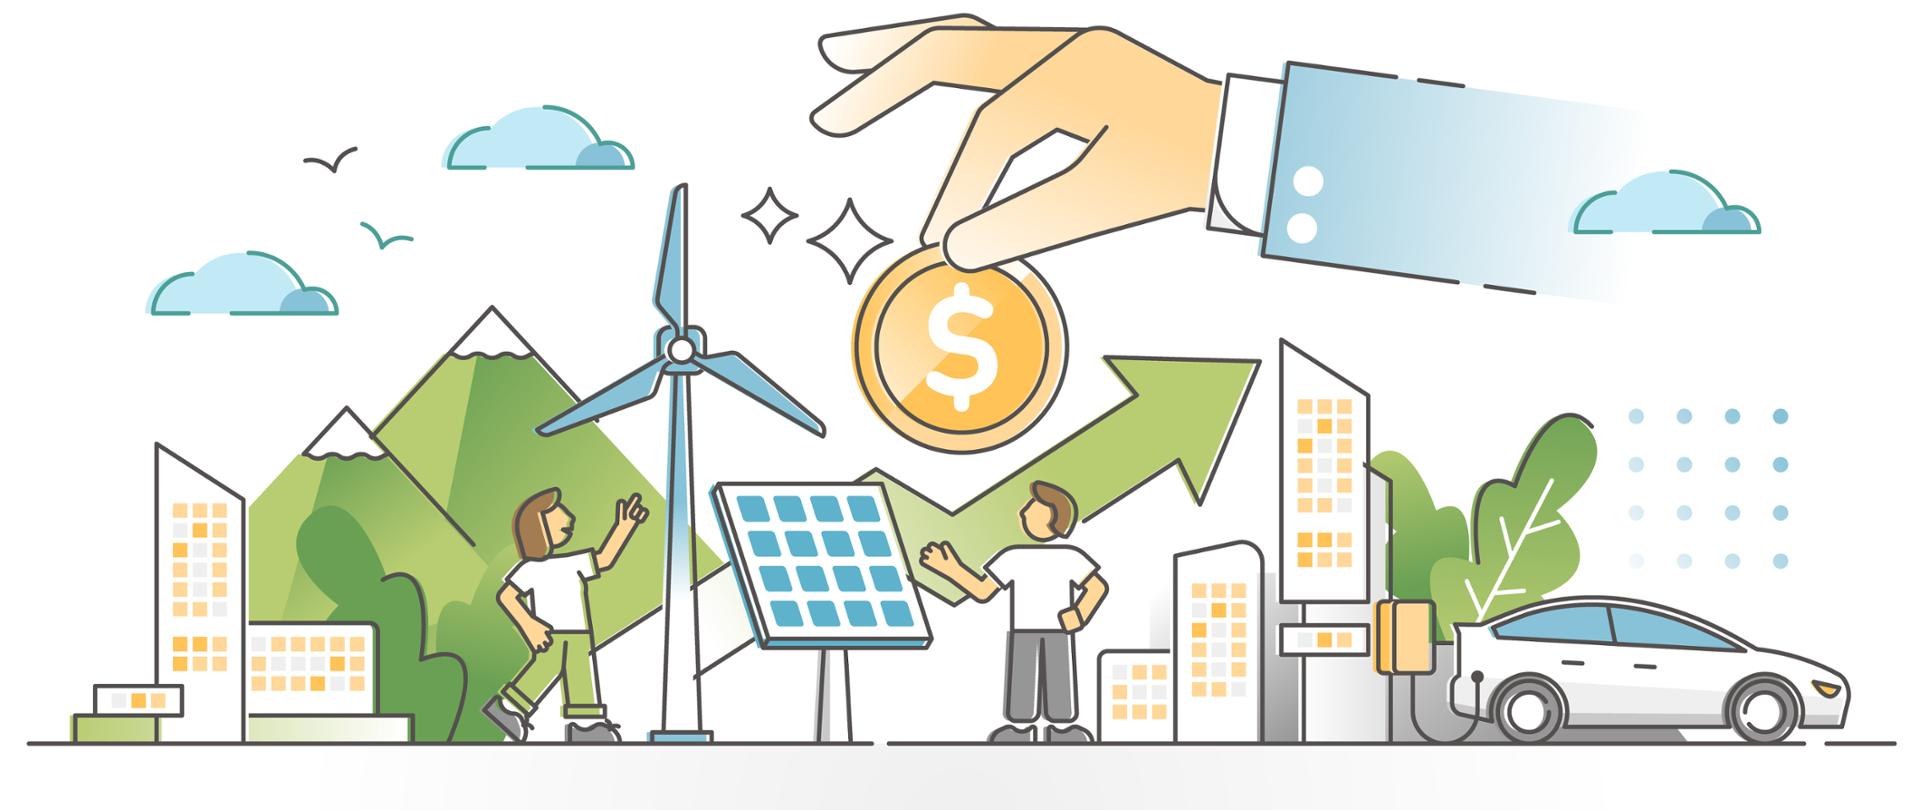 Renewable energy investment as natural future fund strategy outline concept. Alternative electricity and power production financial profit for zero emissions climate approach vector illustration.